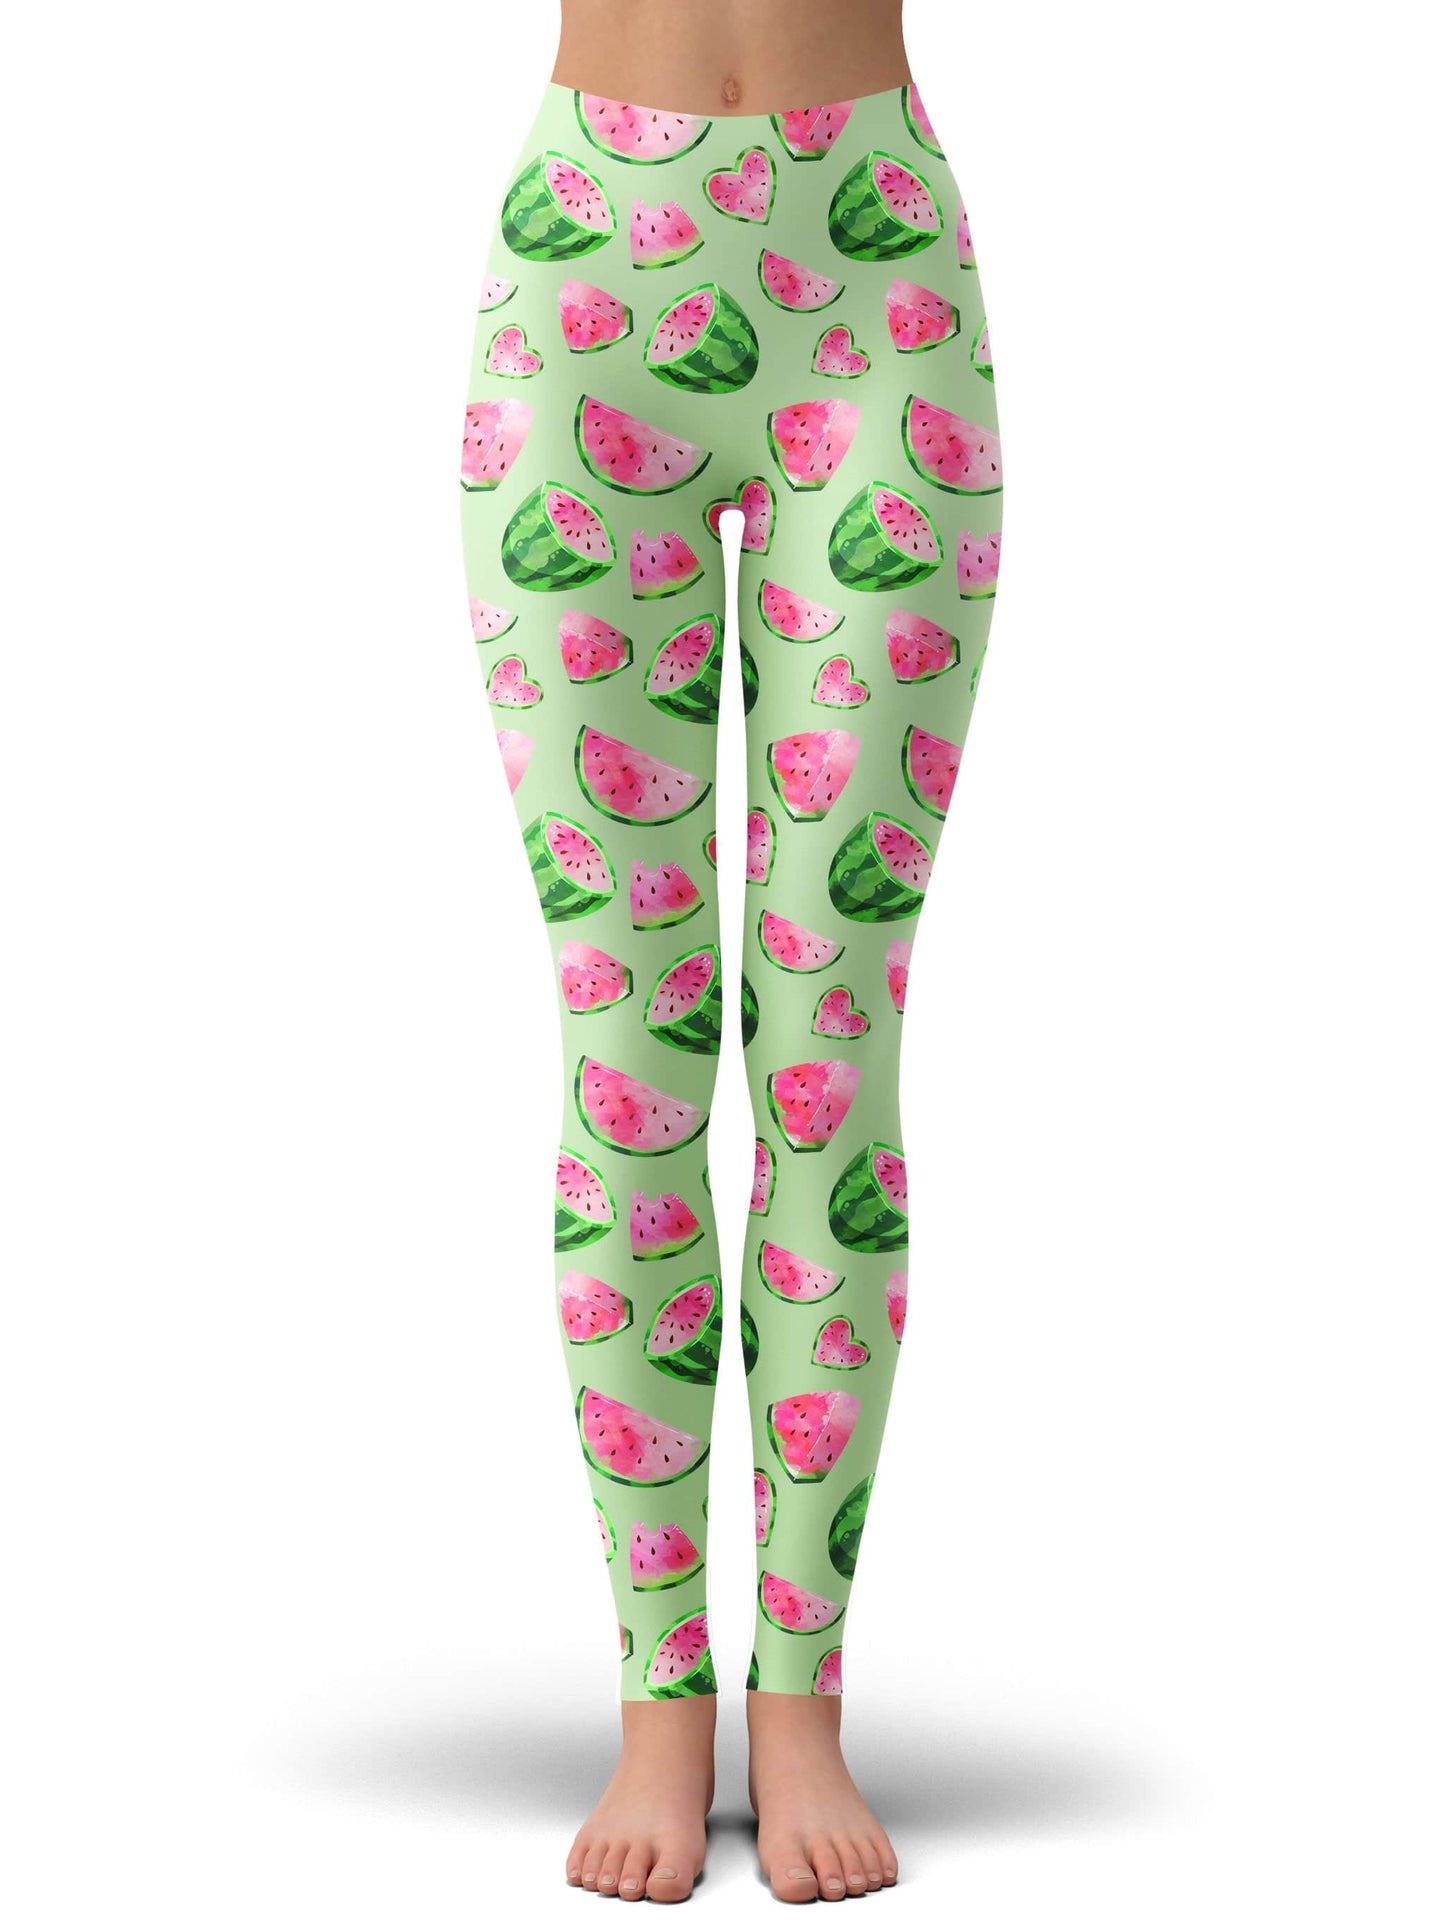 Watermelon Pattern Crop Top and Leggings with PM 2.5 Face Mask Combo, iEDM, | iEDM